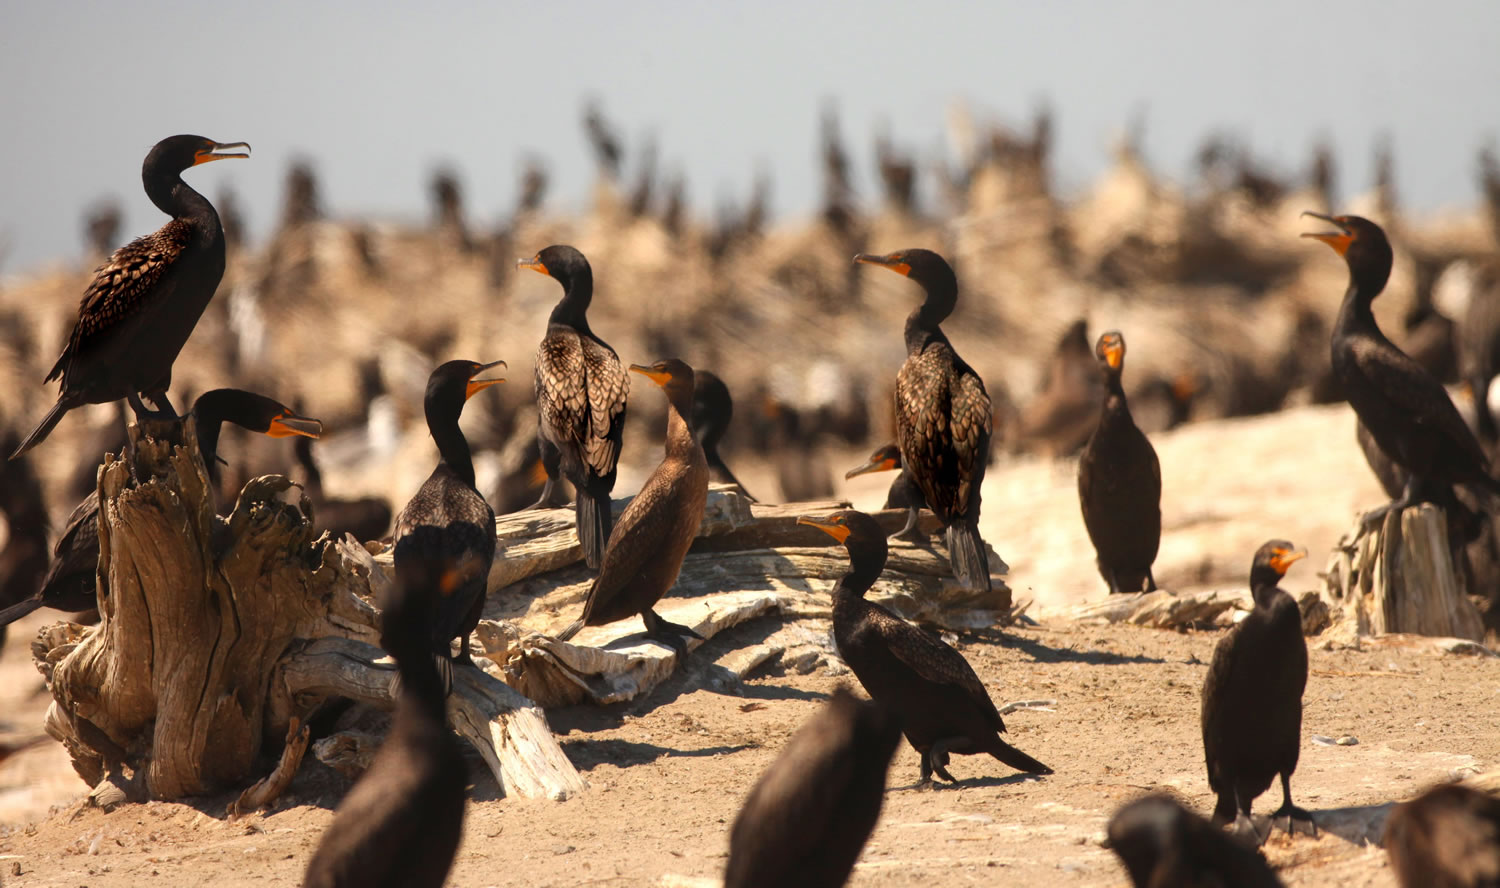 The U.S. Army Corps of Engineers has proposed killing nearly 16,000 double-crested cormorants near the mouth of the Columbia River to protect the endangered fish they eat.